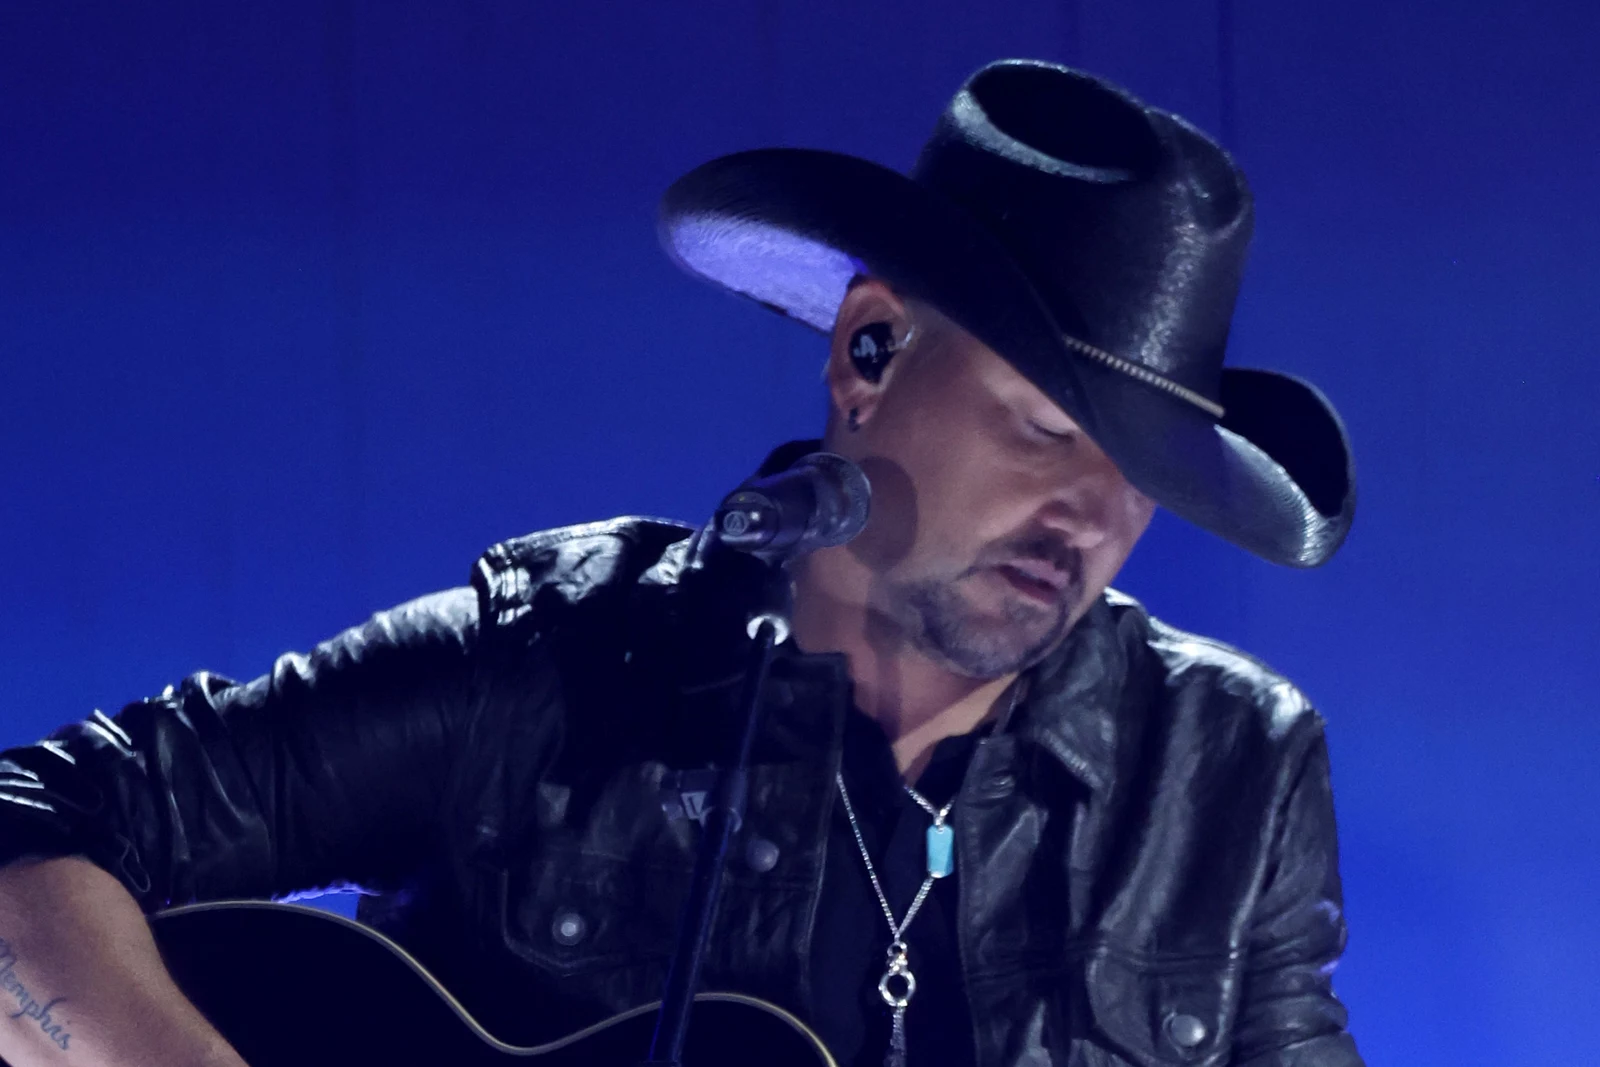 Jason Aldean’s Stirring ACM Awards Tribute For Toby Keith [WATCH]